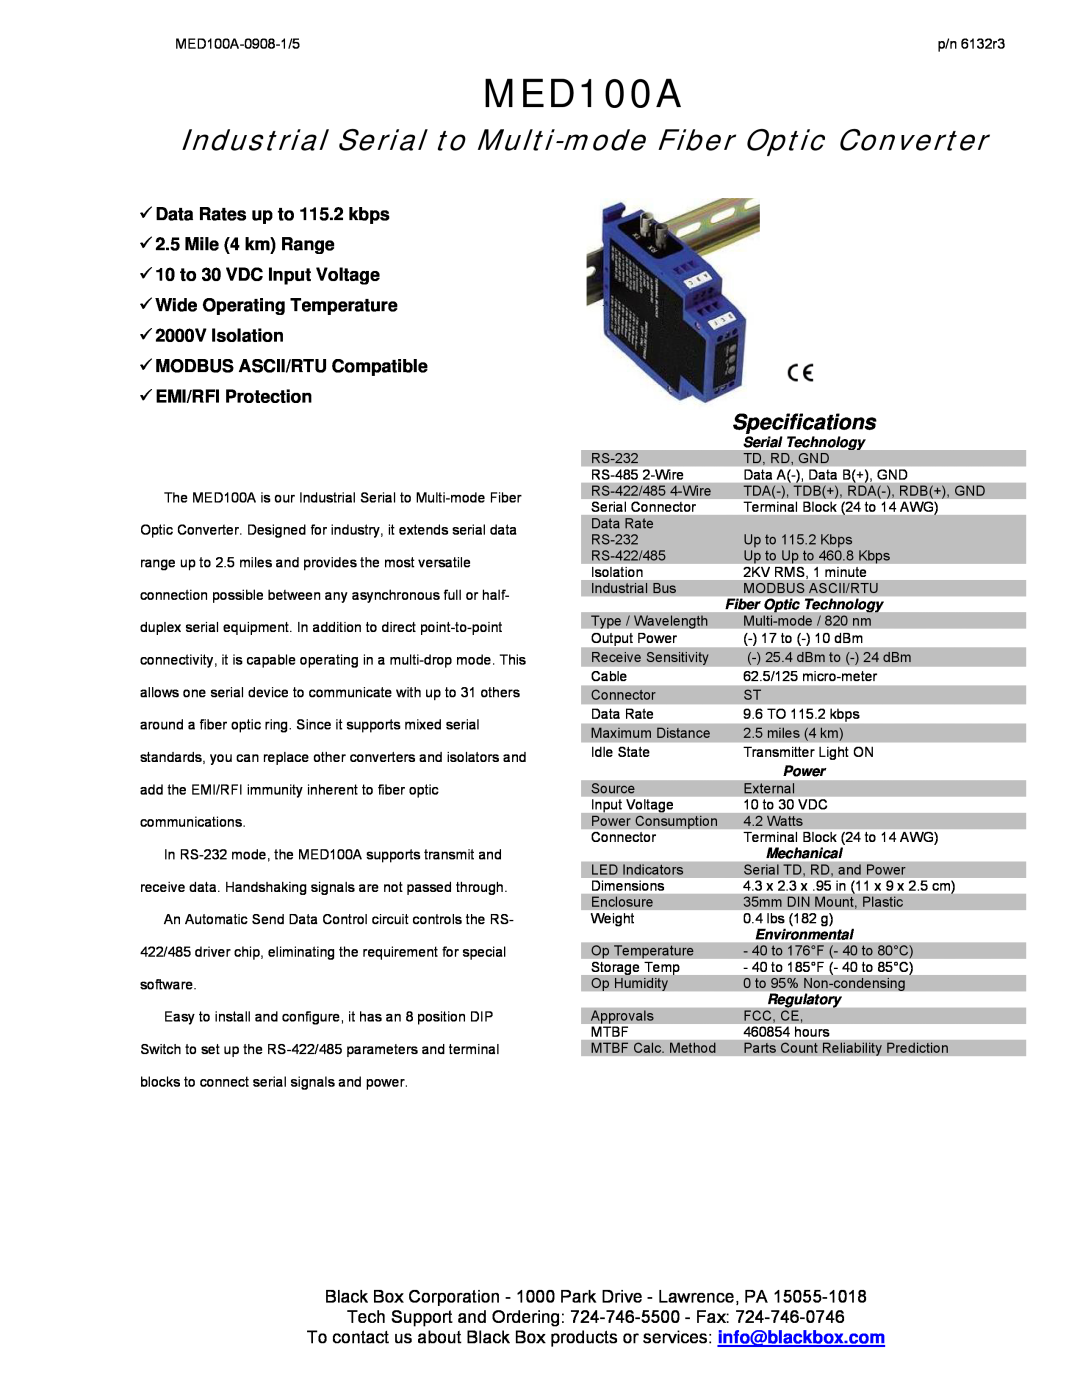 Black Box manual Description, RS-232Connections, RS-422and RS-485Connections, Fiber Optic Modem Sends, Model MED100A 